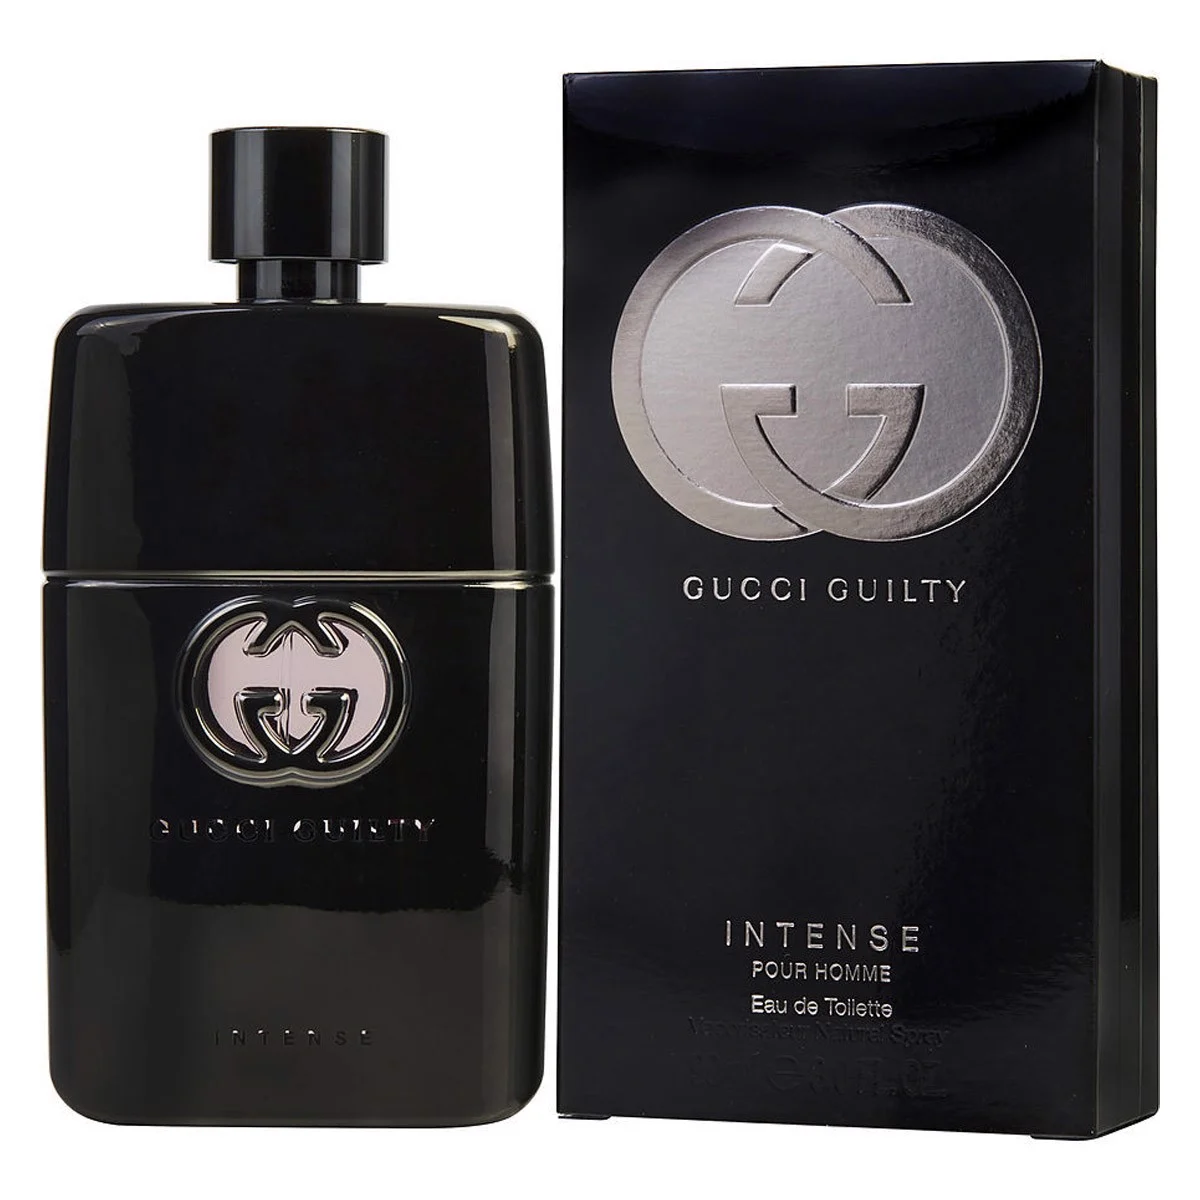 Gucci-Guilty-Intense-Pour-Homme-EDT-gia-tot-nhat